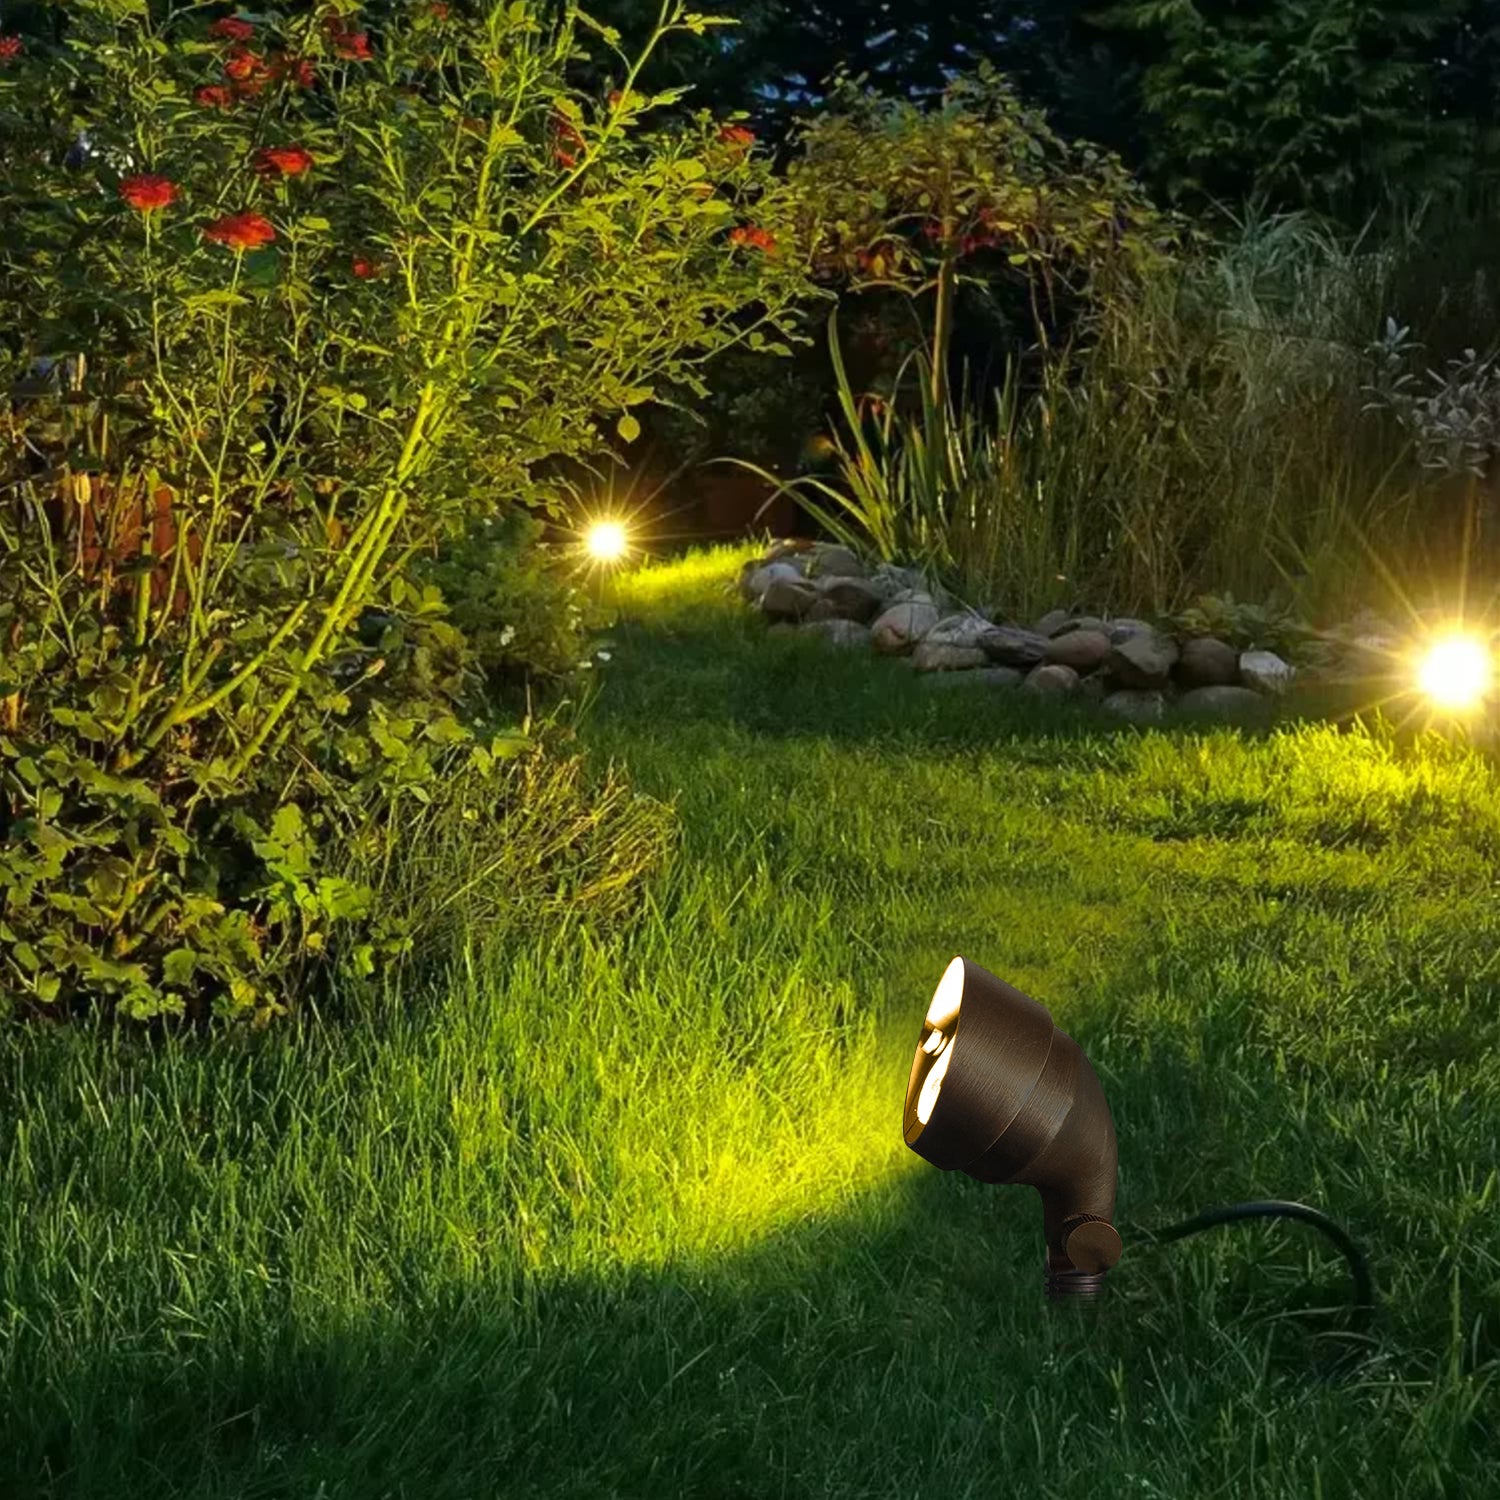 Garden illuminated at night with brass landscape flood lights highlighting plants and a rock feature, providing a warm, ambient glow